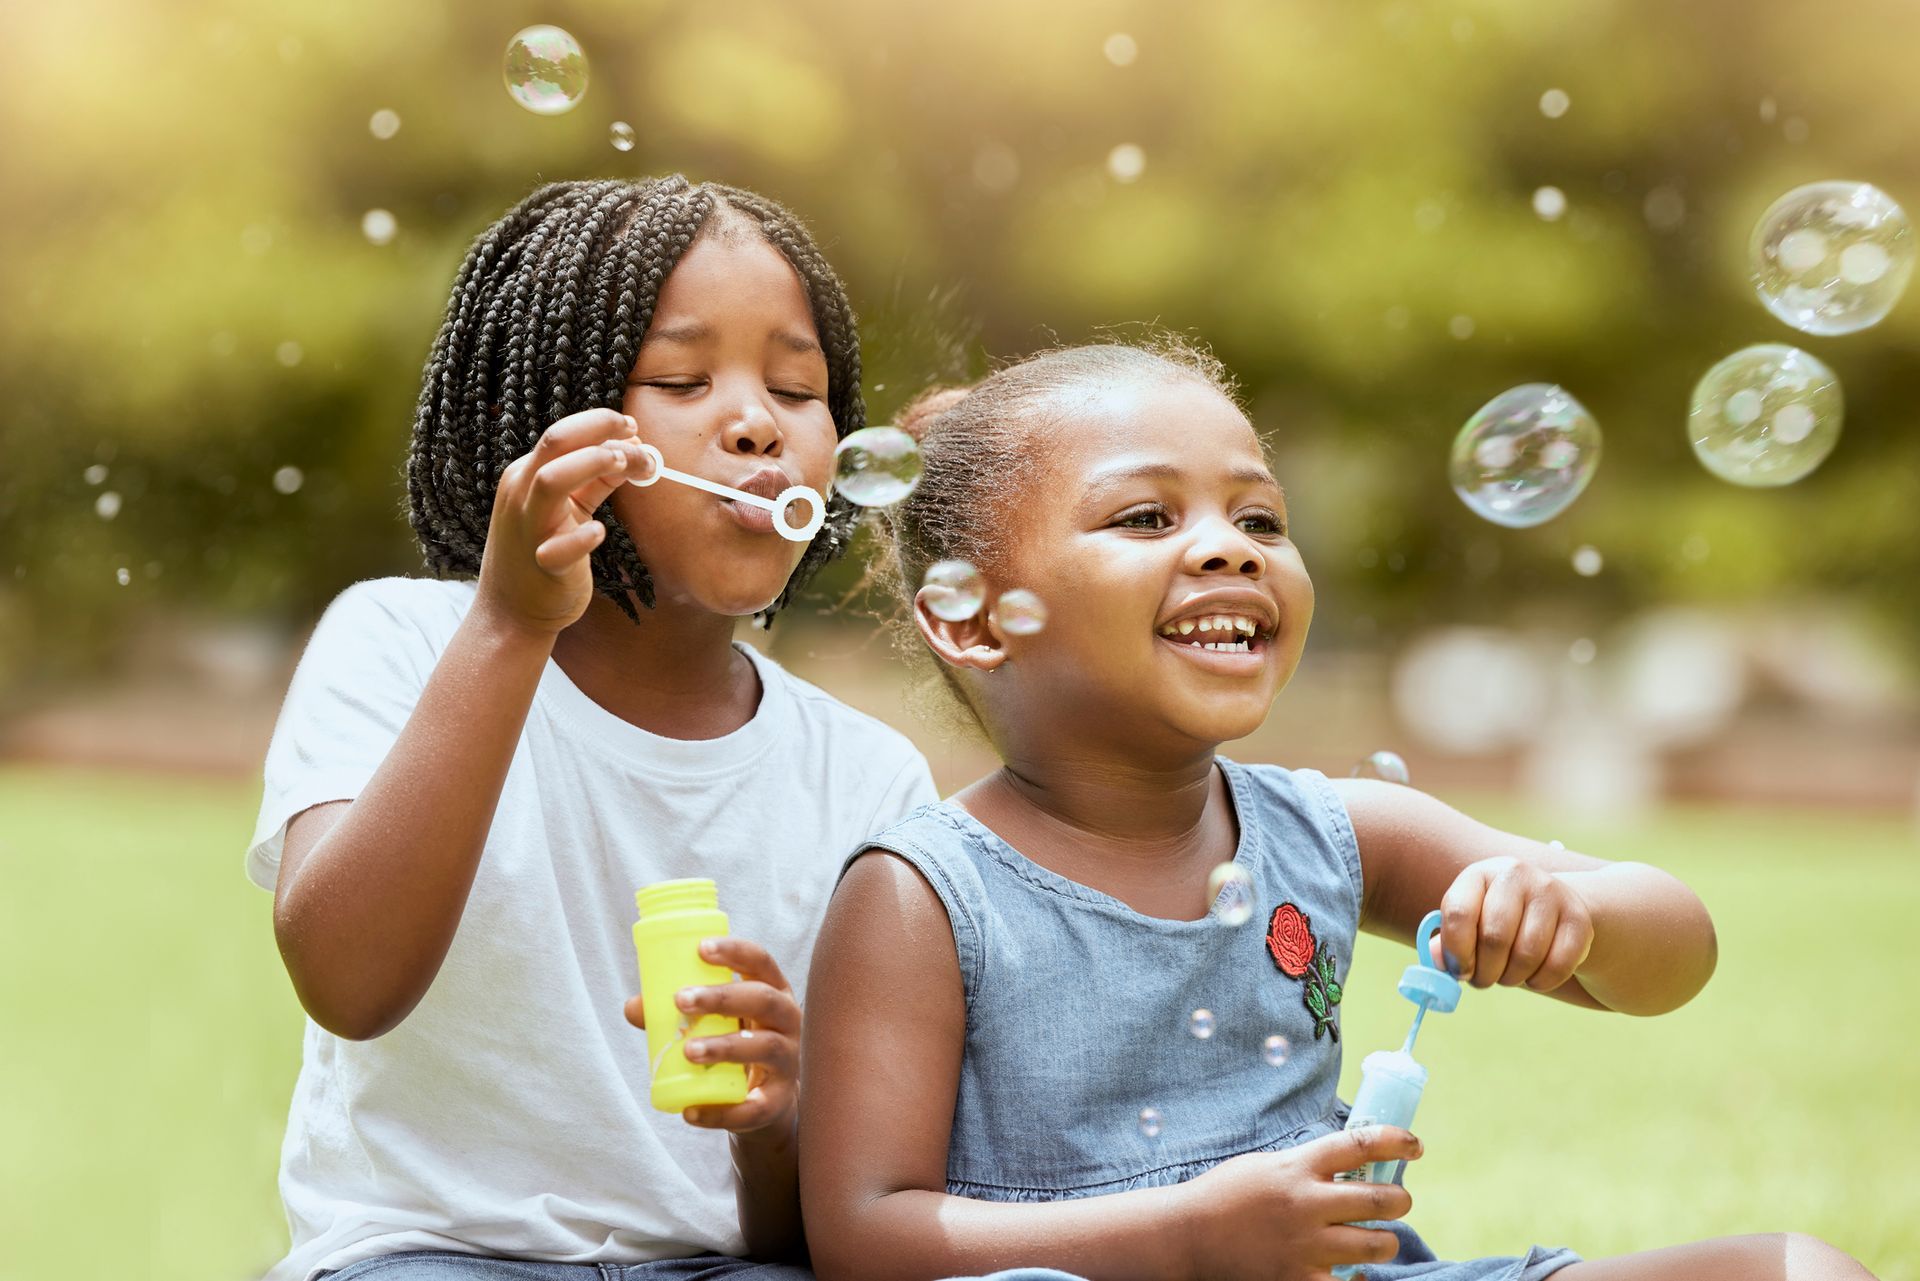 Two little girls are blowing soap bubbles in a park.